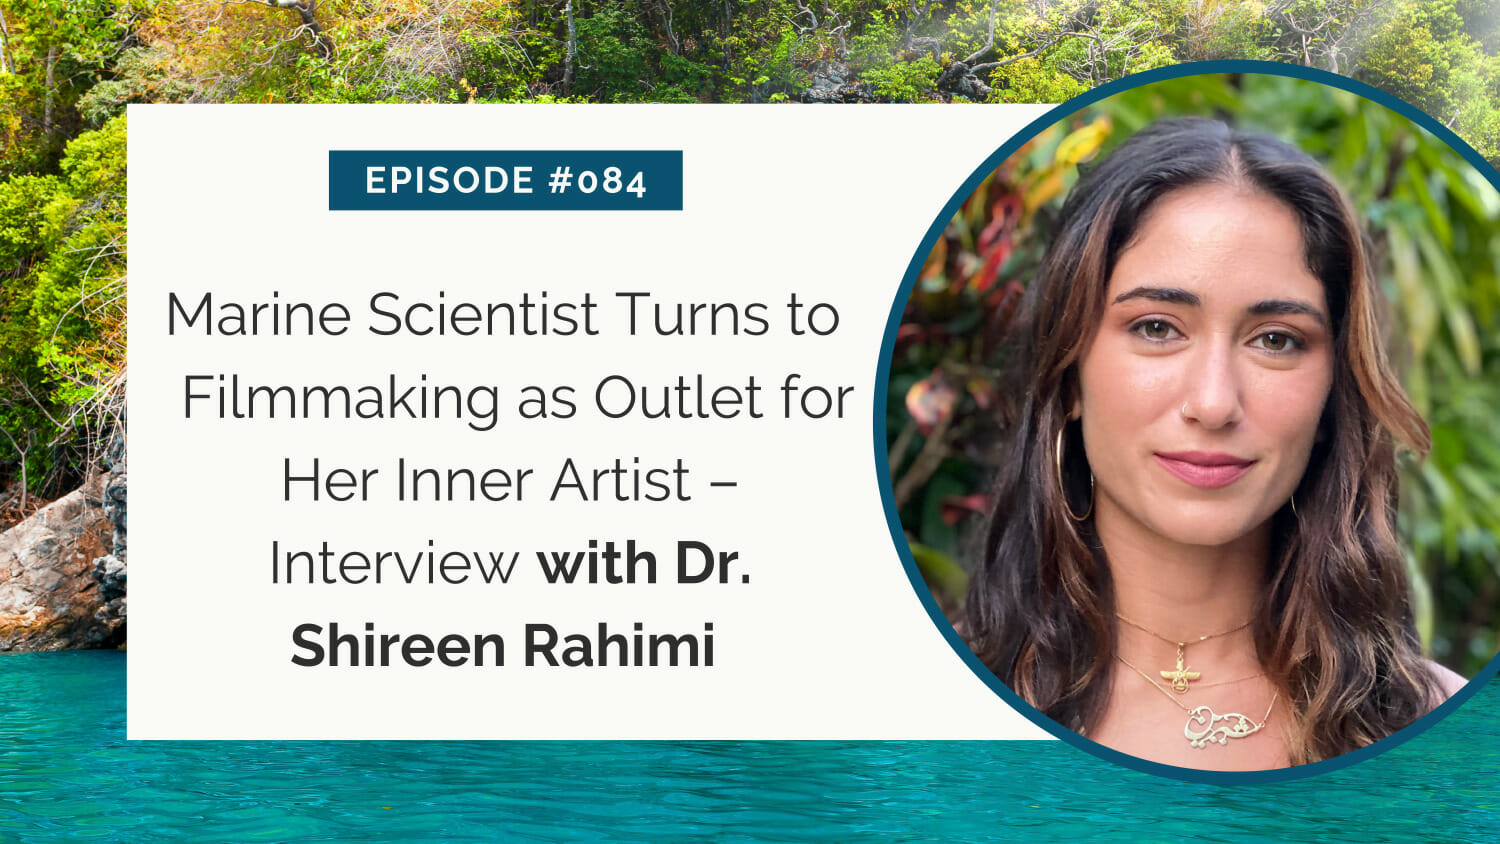 Podcast episode #084 – marine scientist dr. shireen rahimi shares her journey into filmmaking to explore her artistic side.